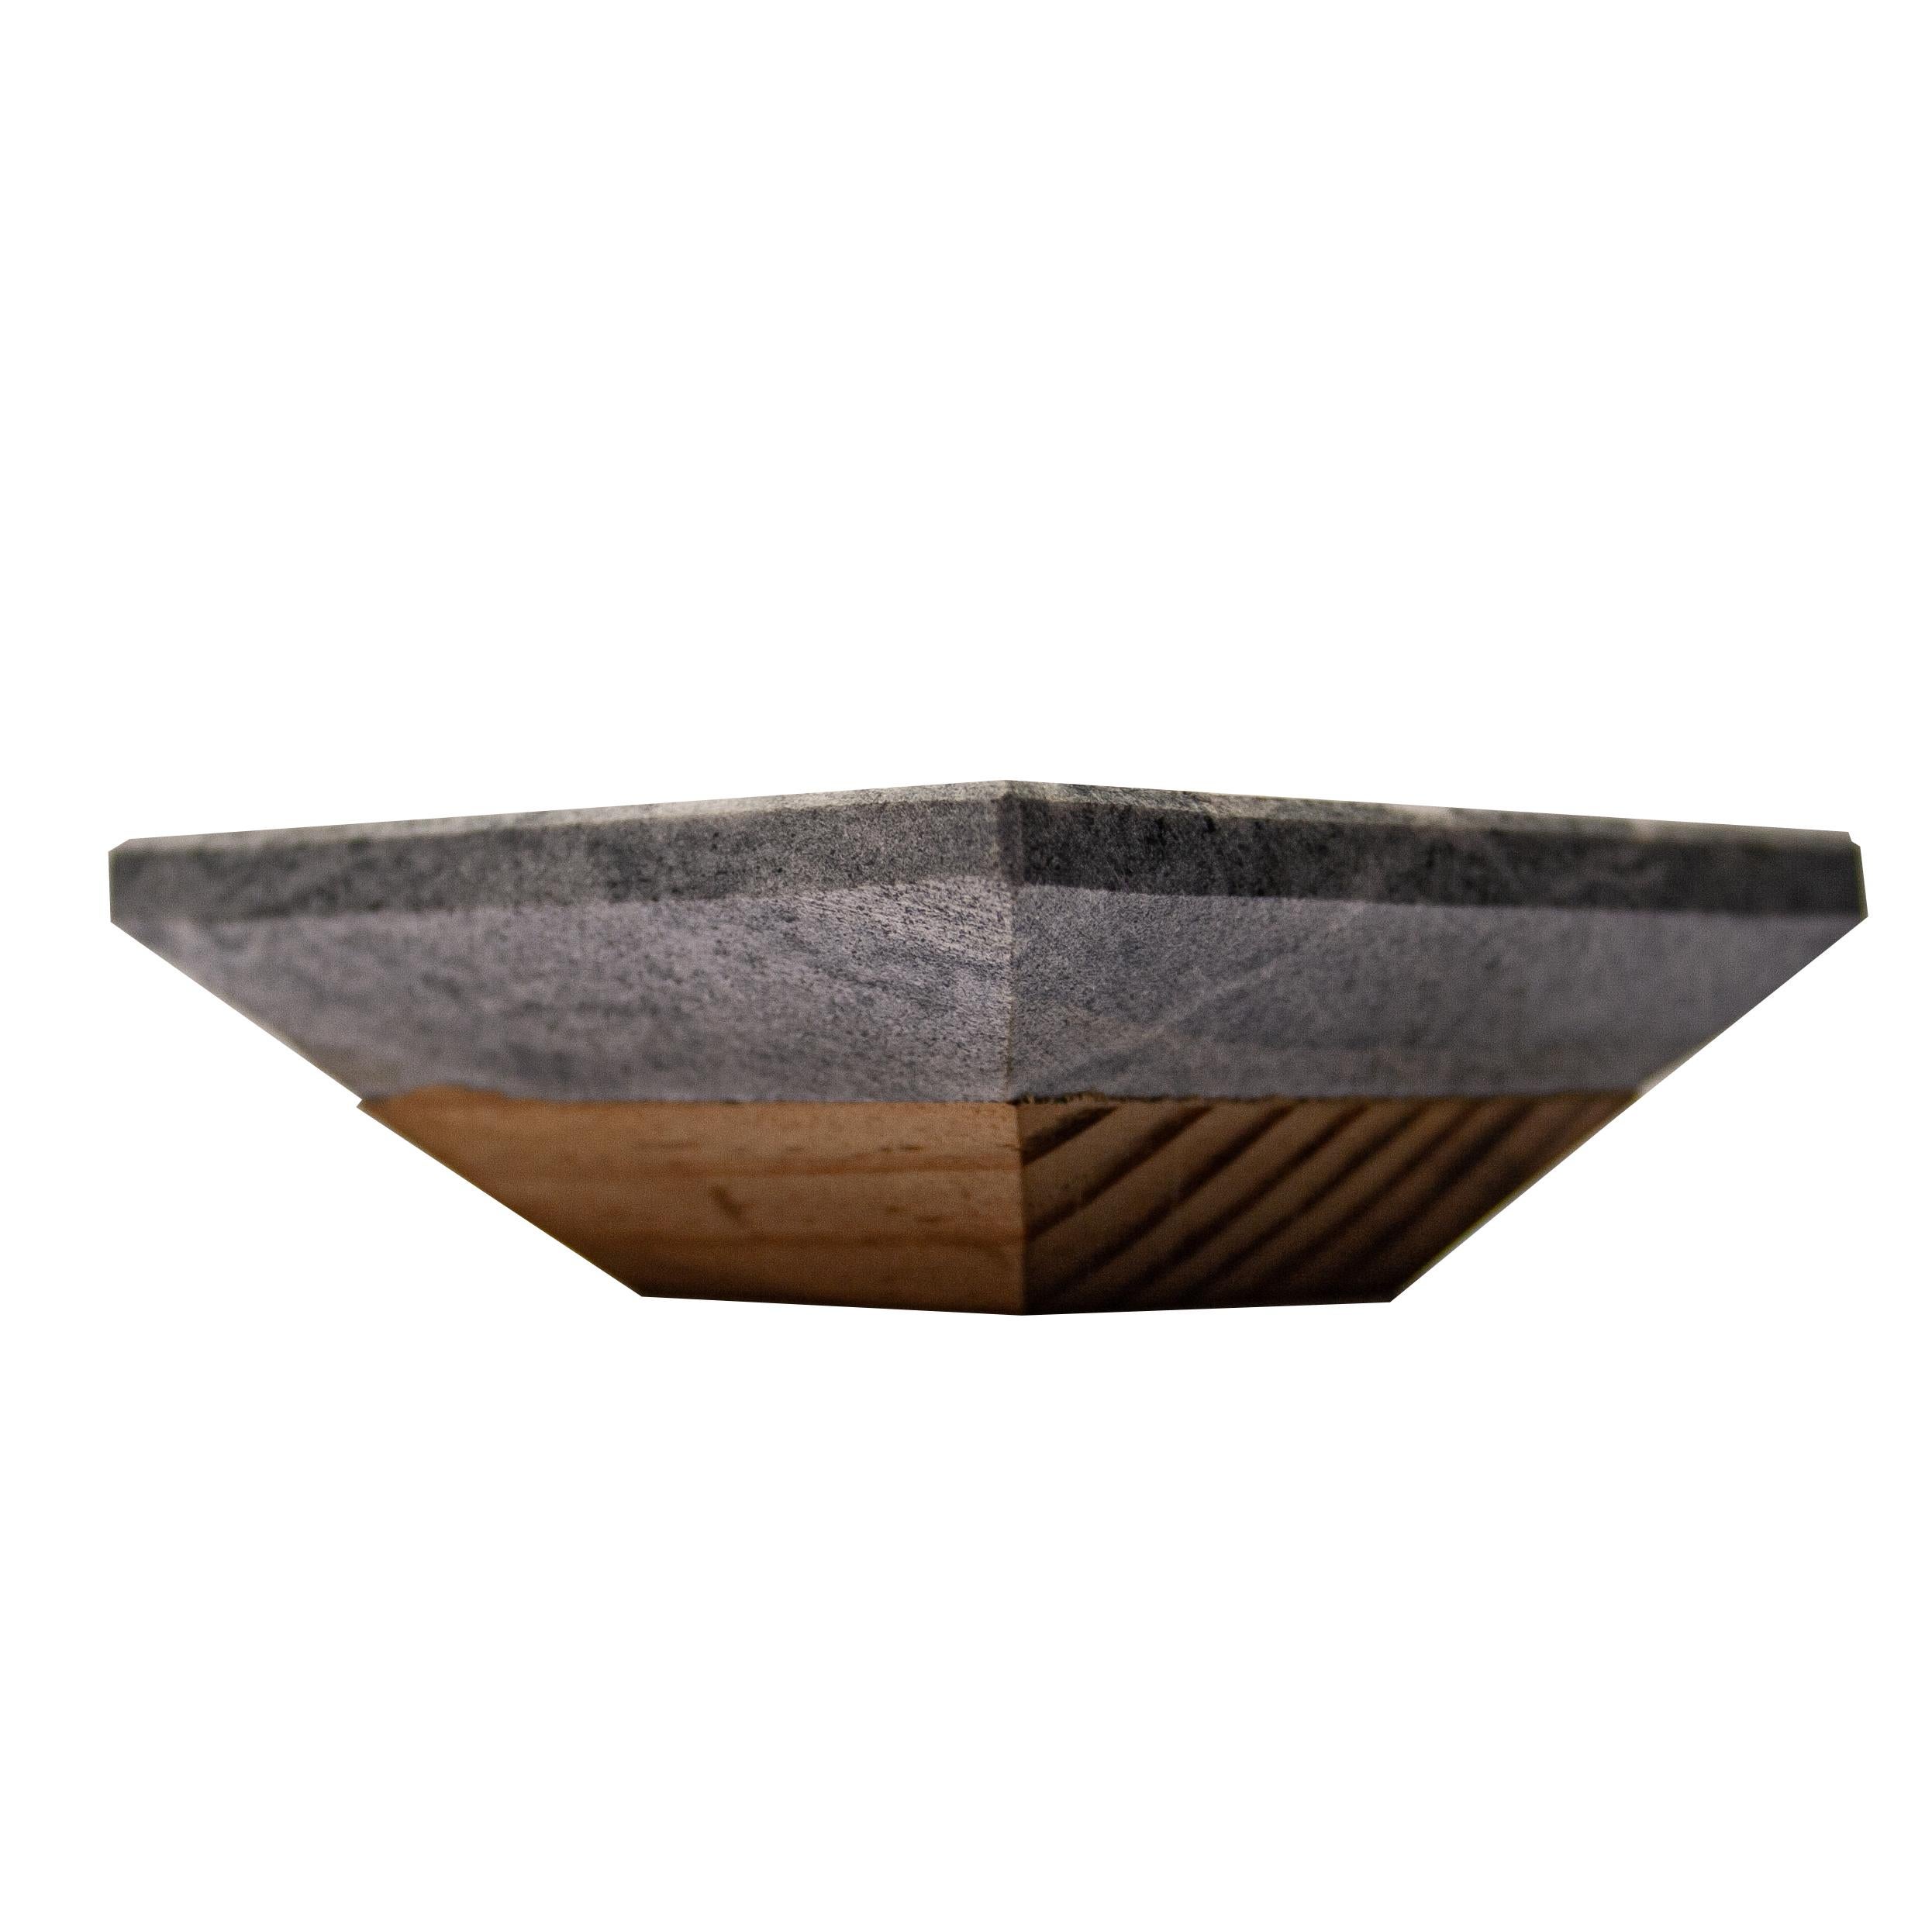 Gray Marble Candle Holder White Veined  Contemporary Design Mother’s Day Gift.
Its shape is square in its surface and pyramidal in height, in the center of the surface a circular indentation has a small candle embedded in the center.
This candle